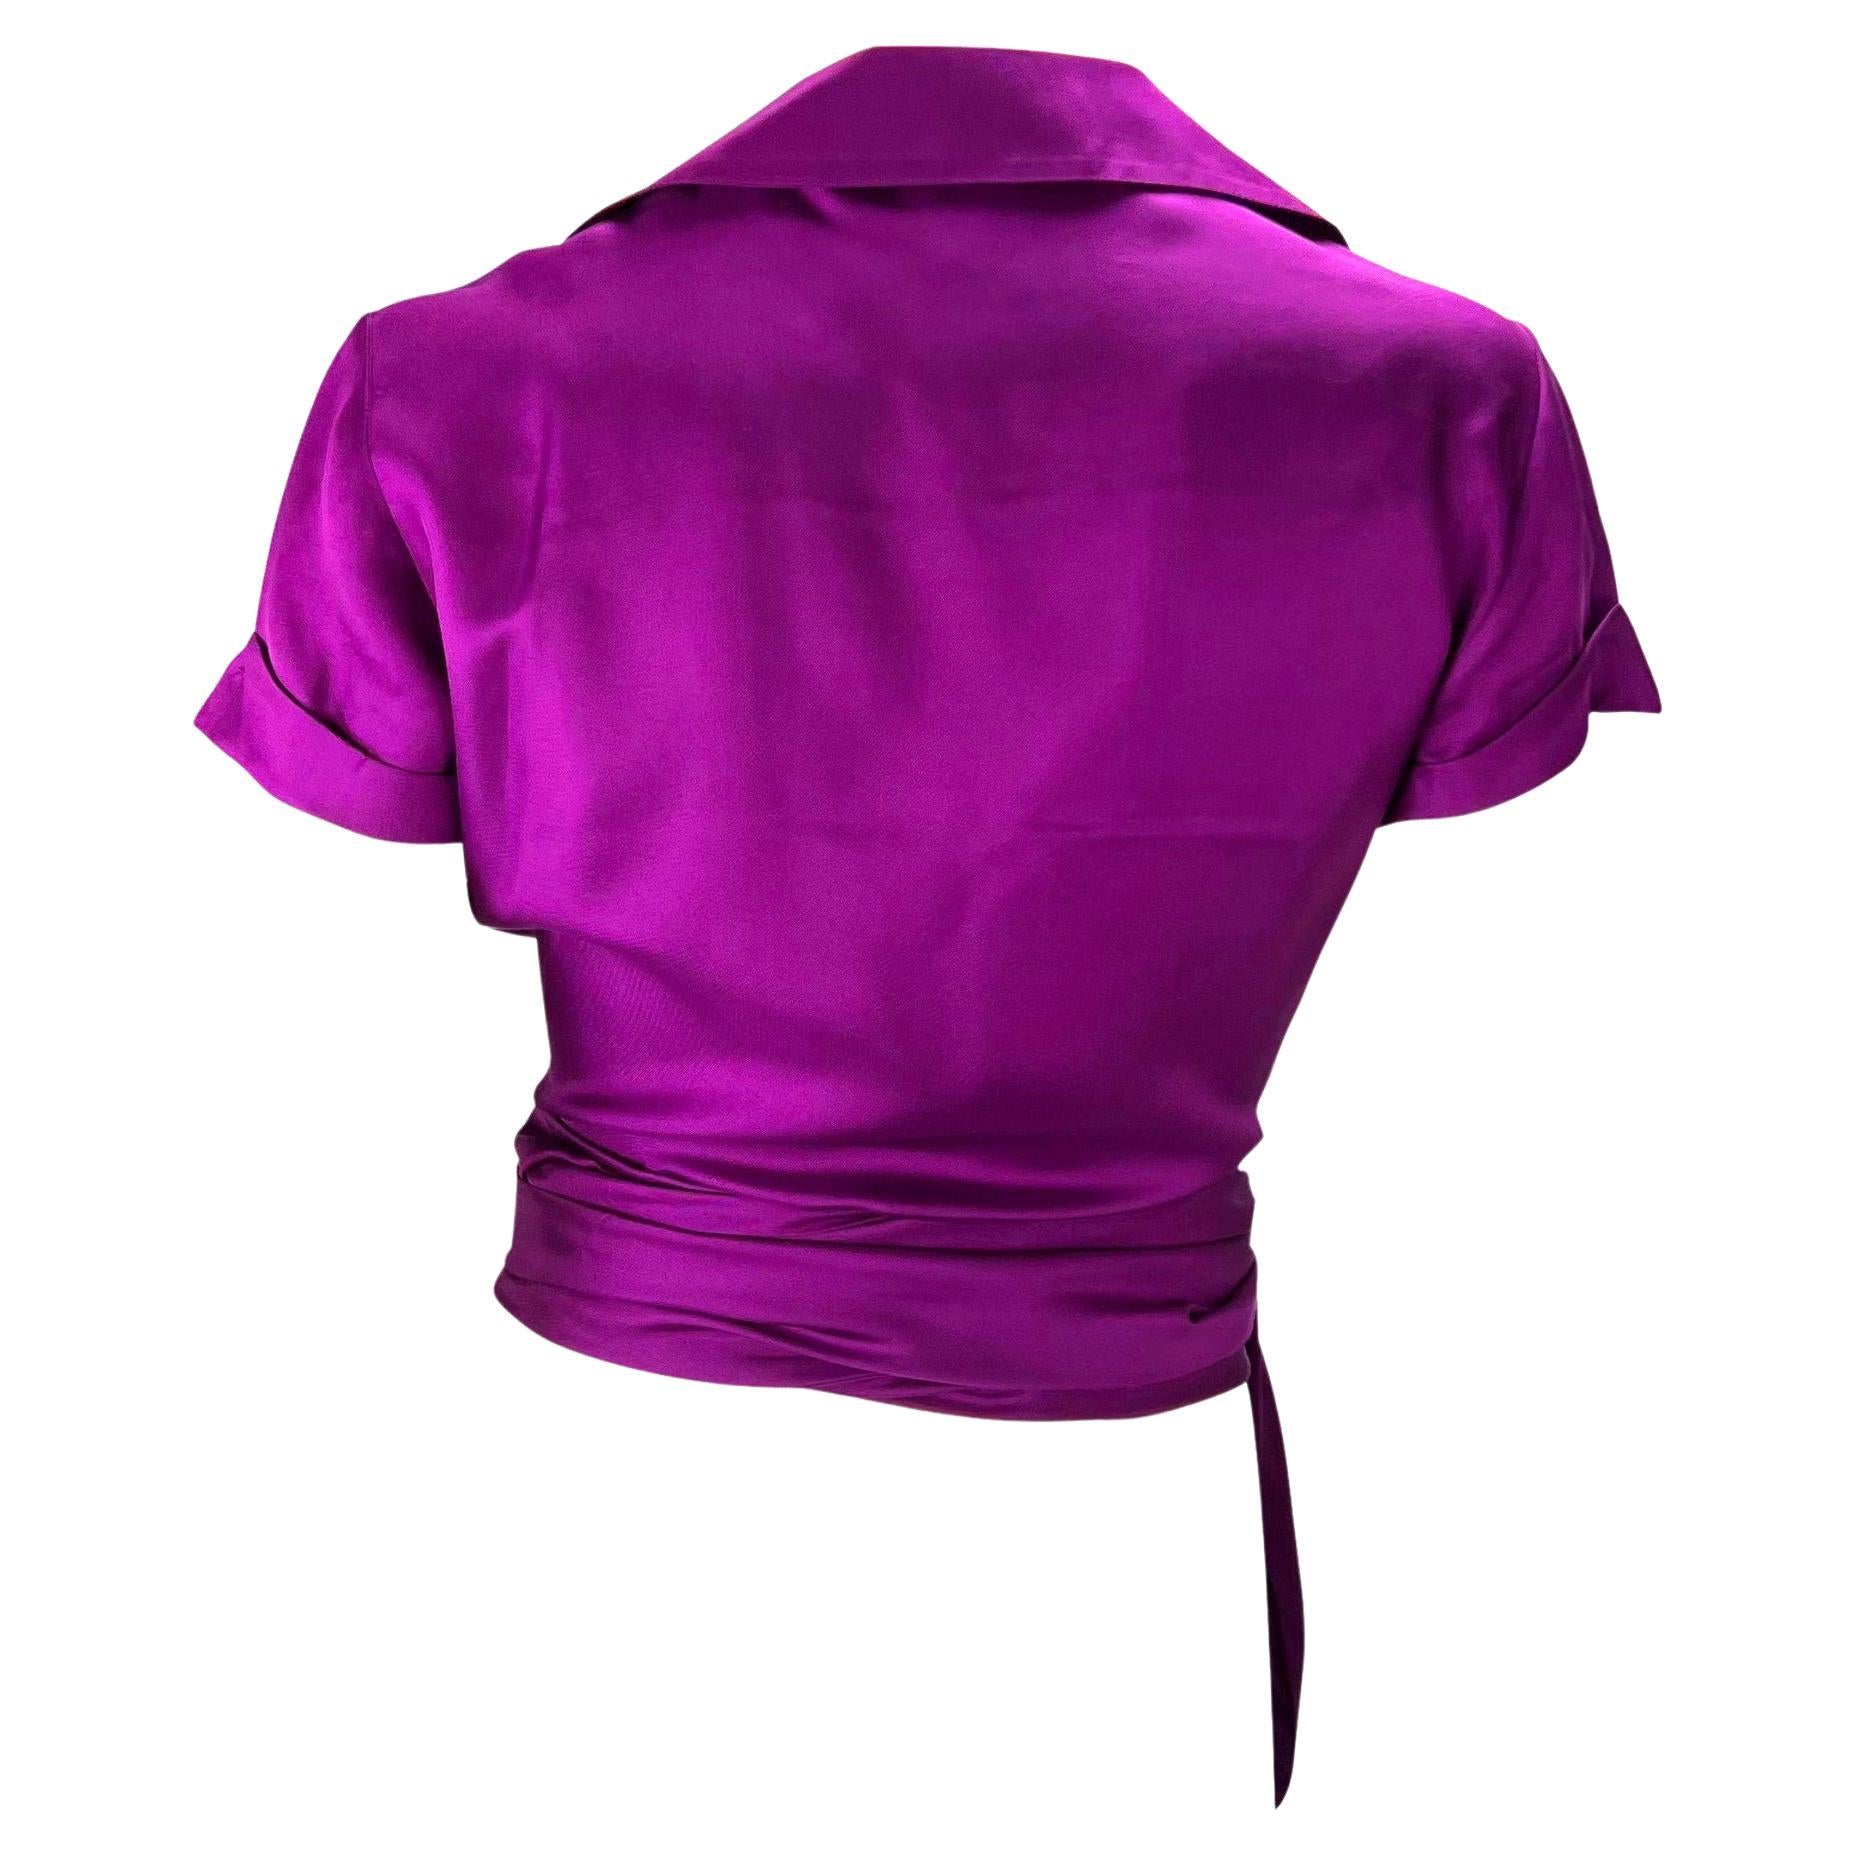 S/S 2000 Gianni Versace by Donatella Runway Purple Silk Plunge Wrap Top In Excellent Condition For Sale In West Hollywood, CA